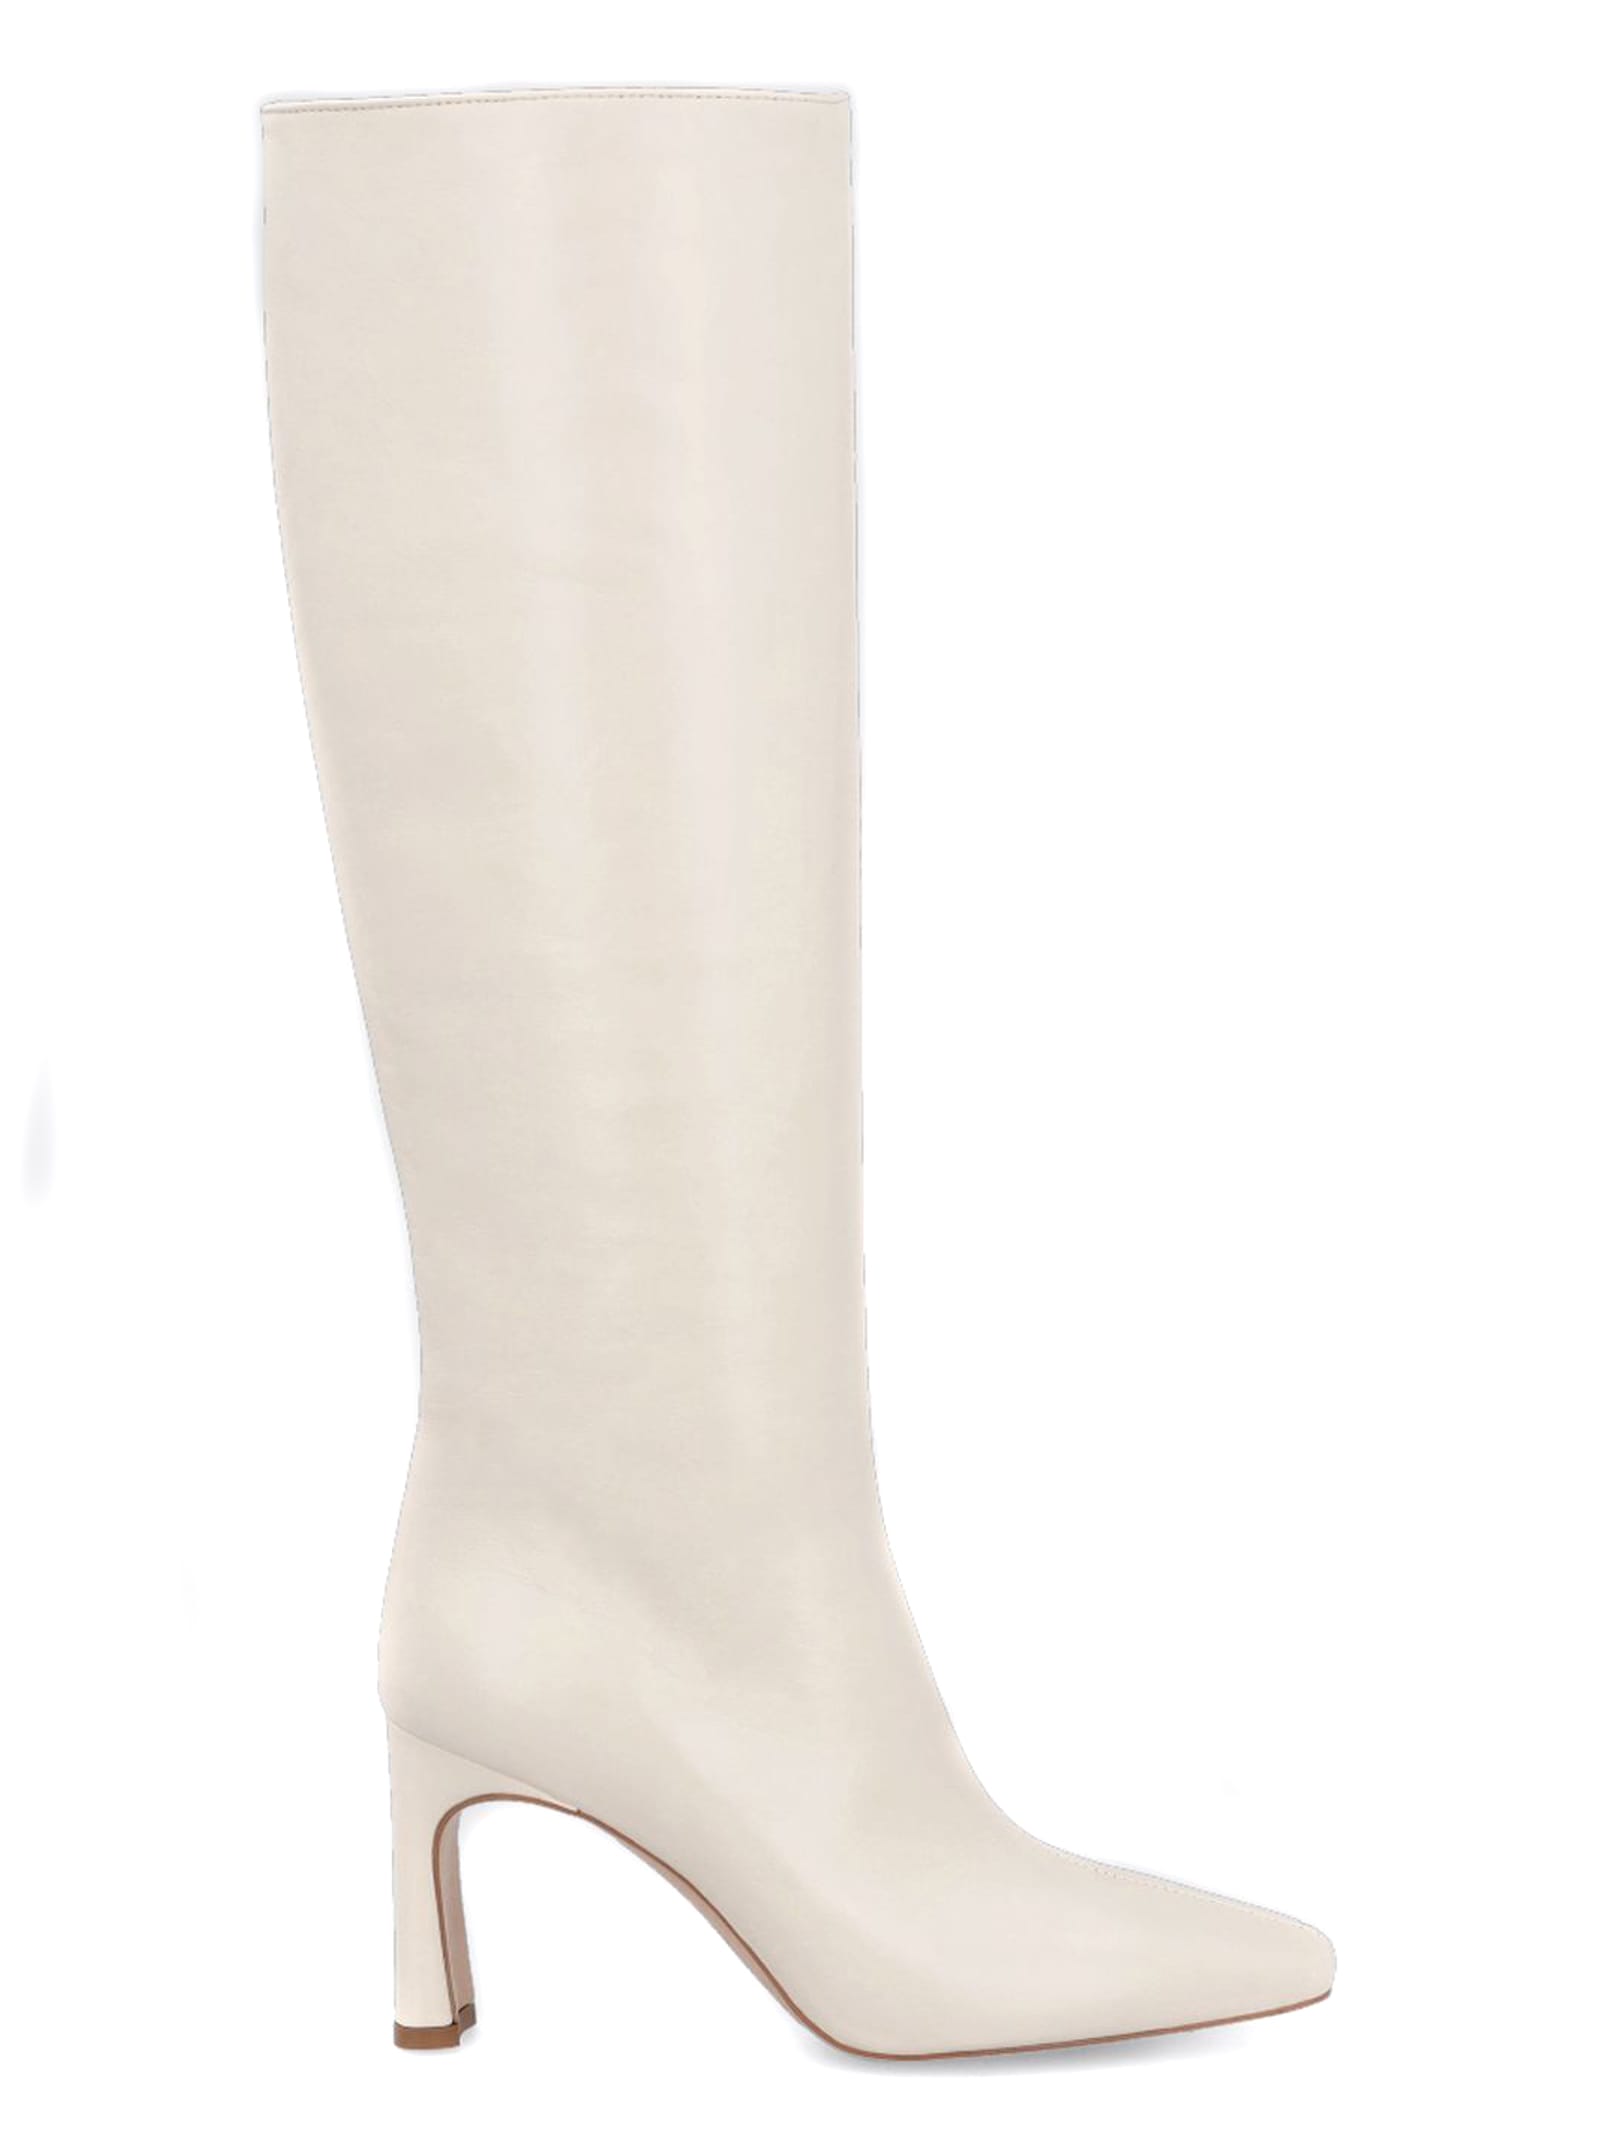 Leonie Hanne White Leather High Heel Boots